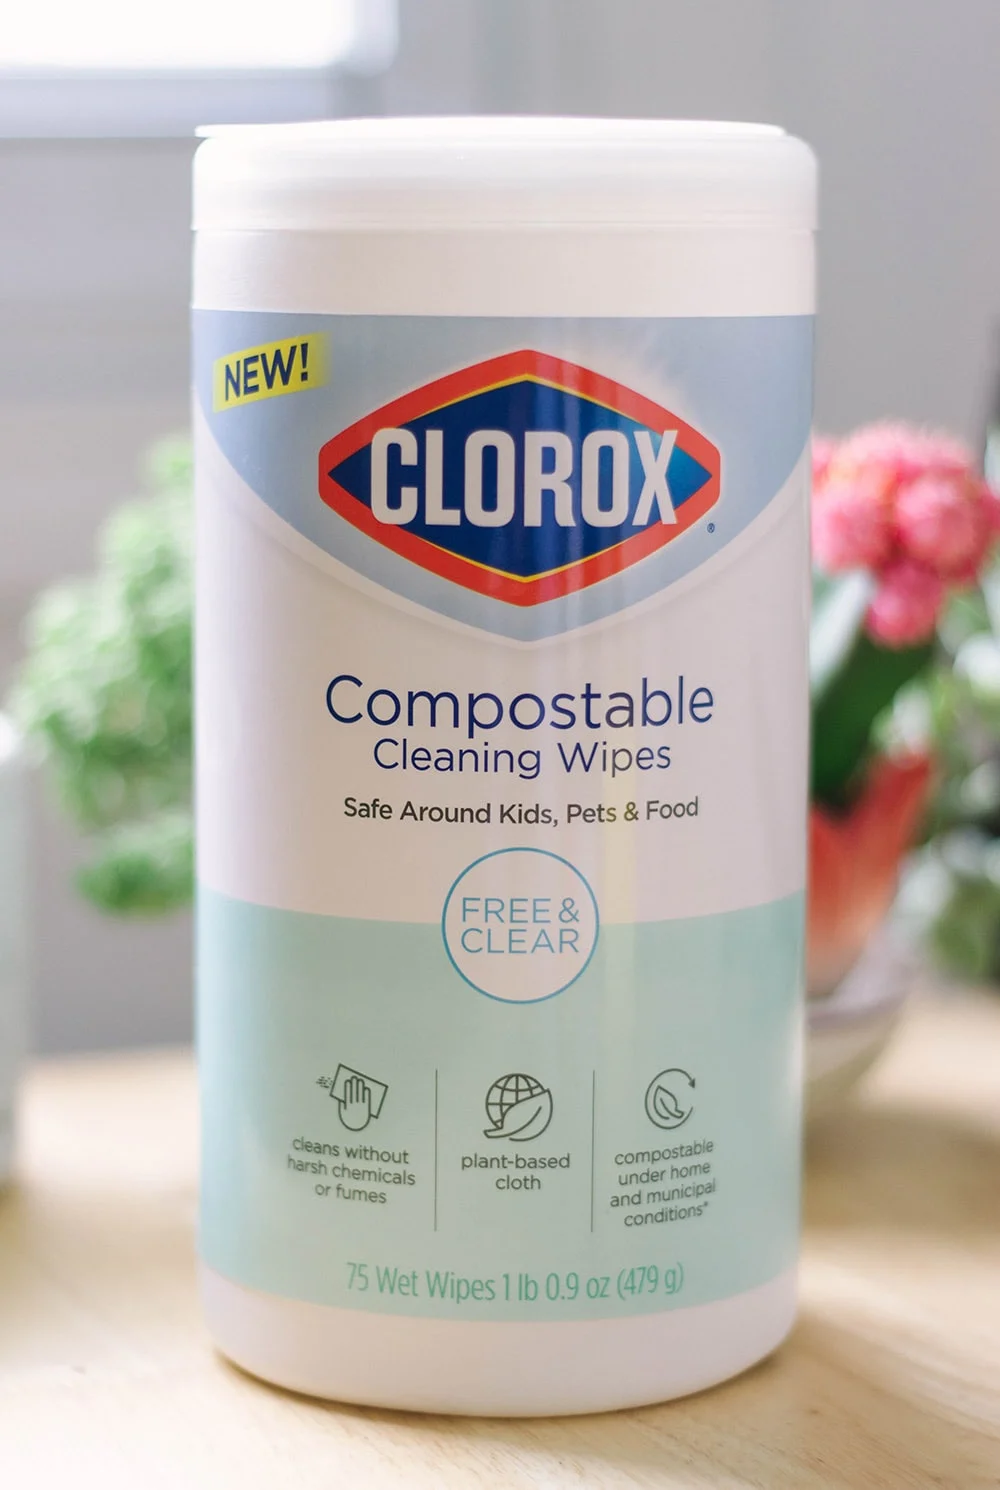 Clorox Compostable Wipes.